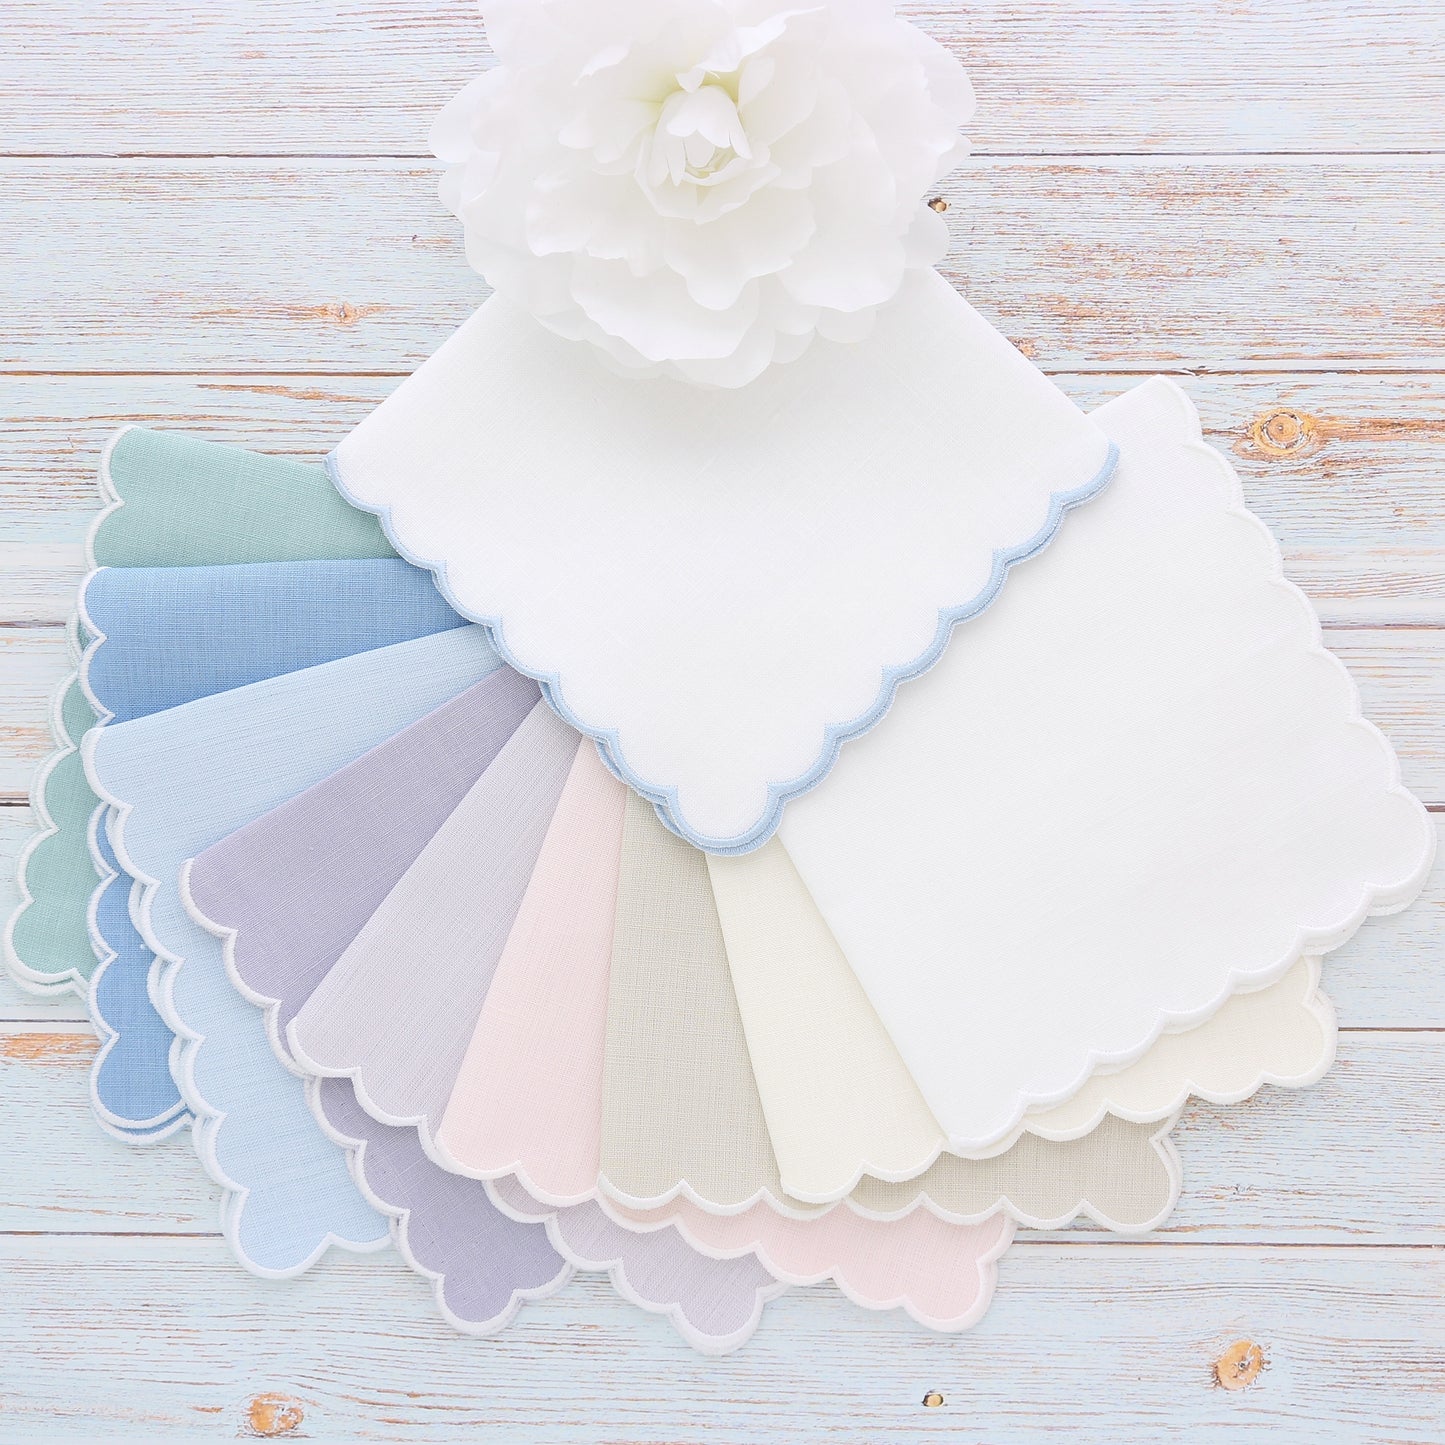 Various colorful linen handkerchief with White scallops